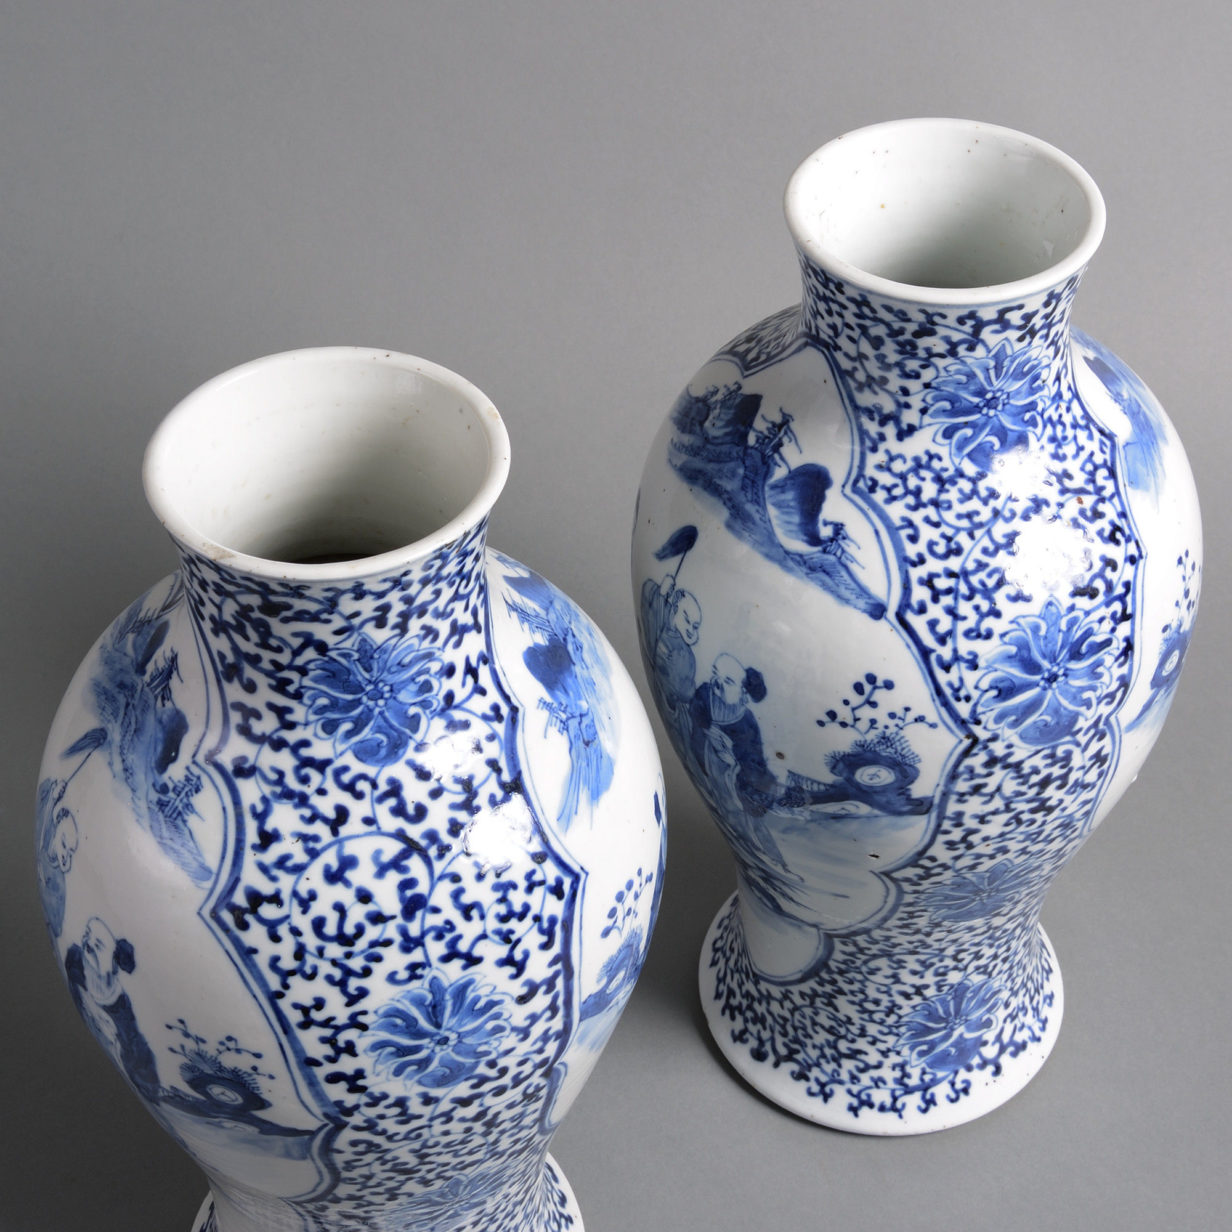 A Pair of 19th Century Qing Period Blue and White Porcelain Vases